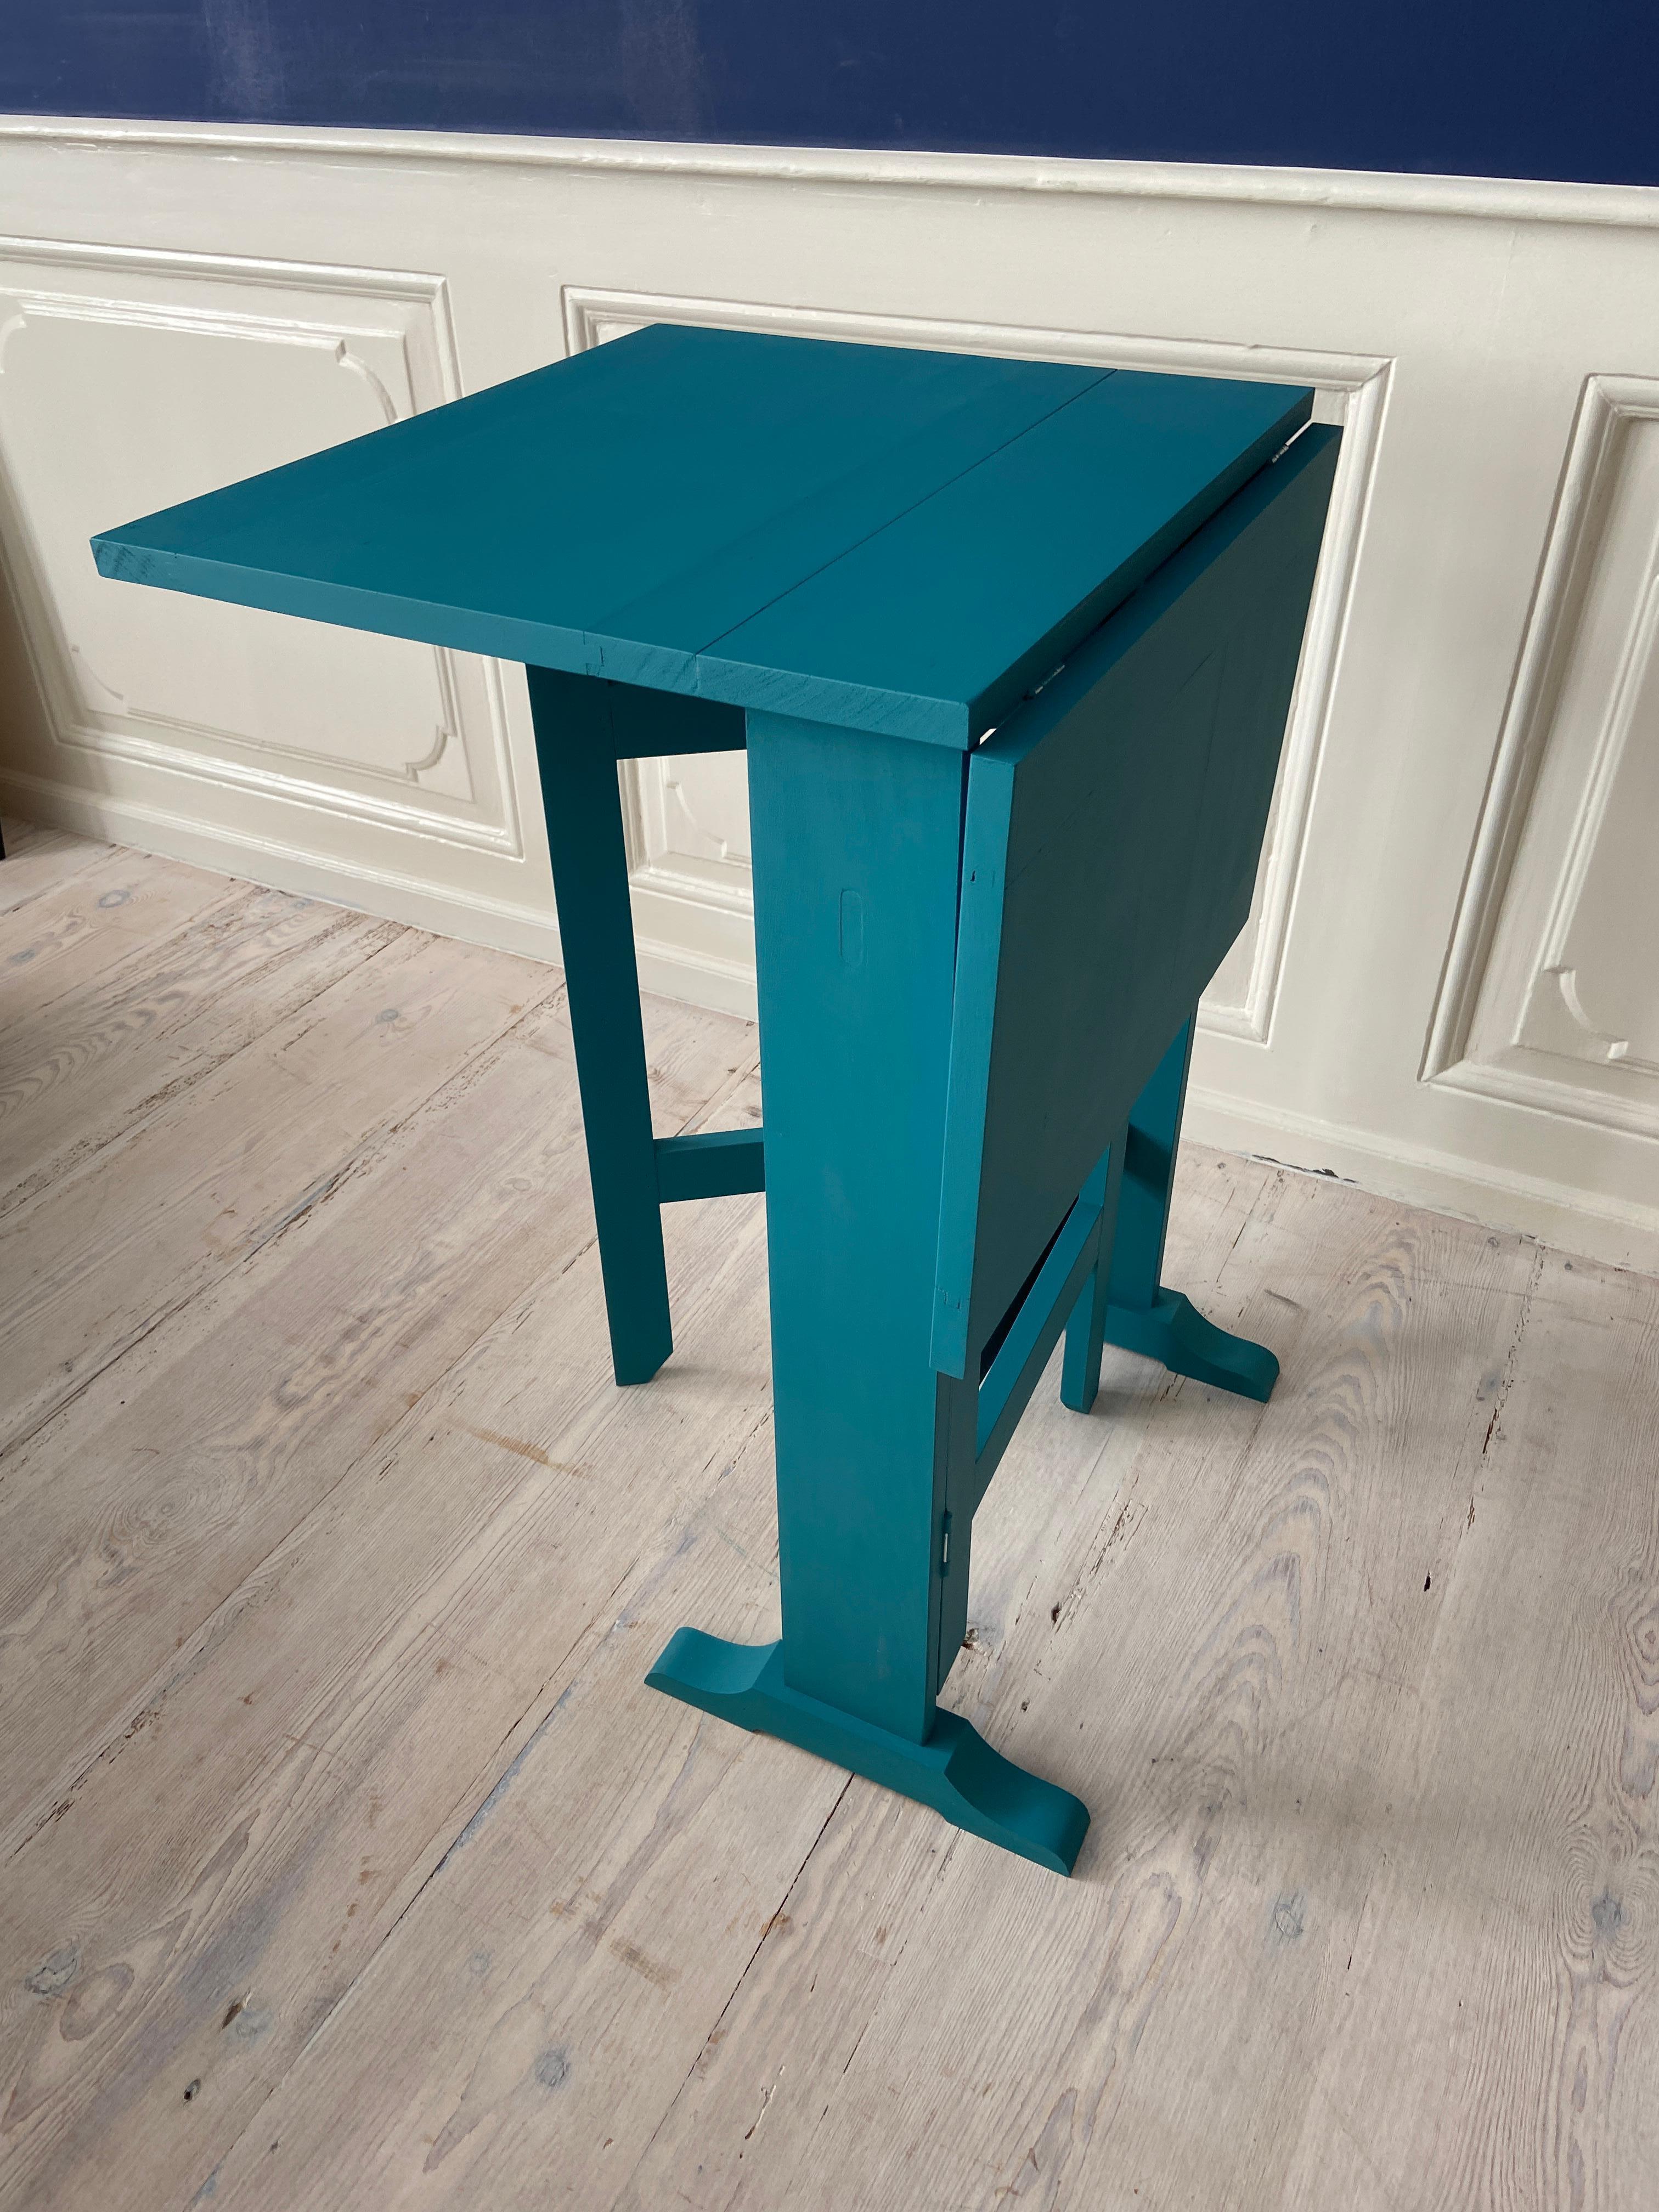 Contemporary Drop Leaf Table in Petrol Blue Painted Wood, Belgium 1